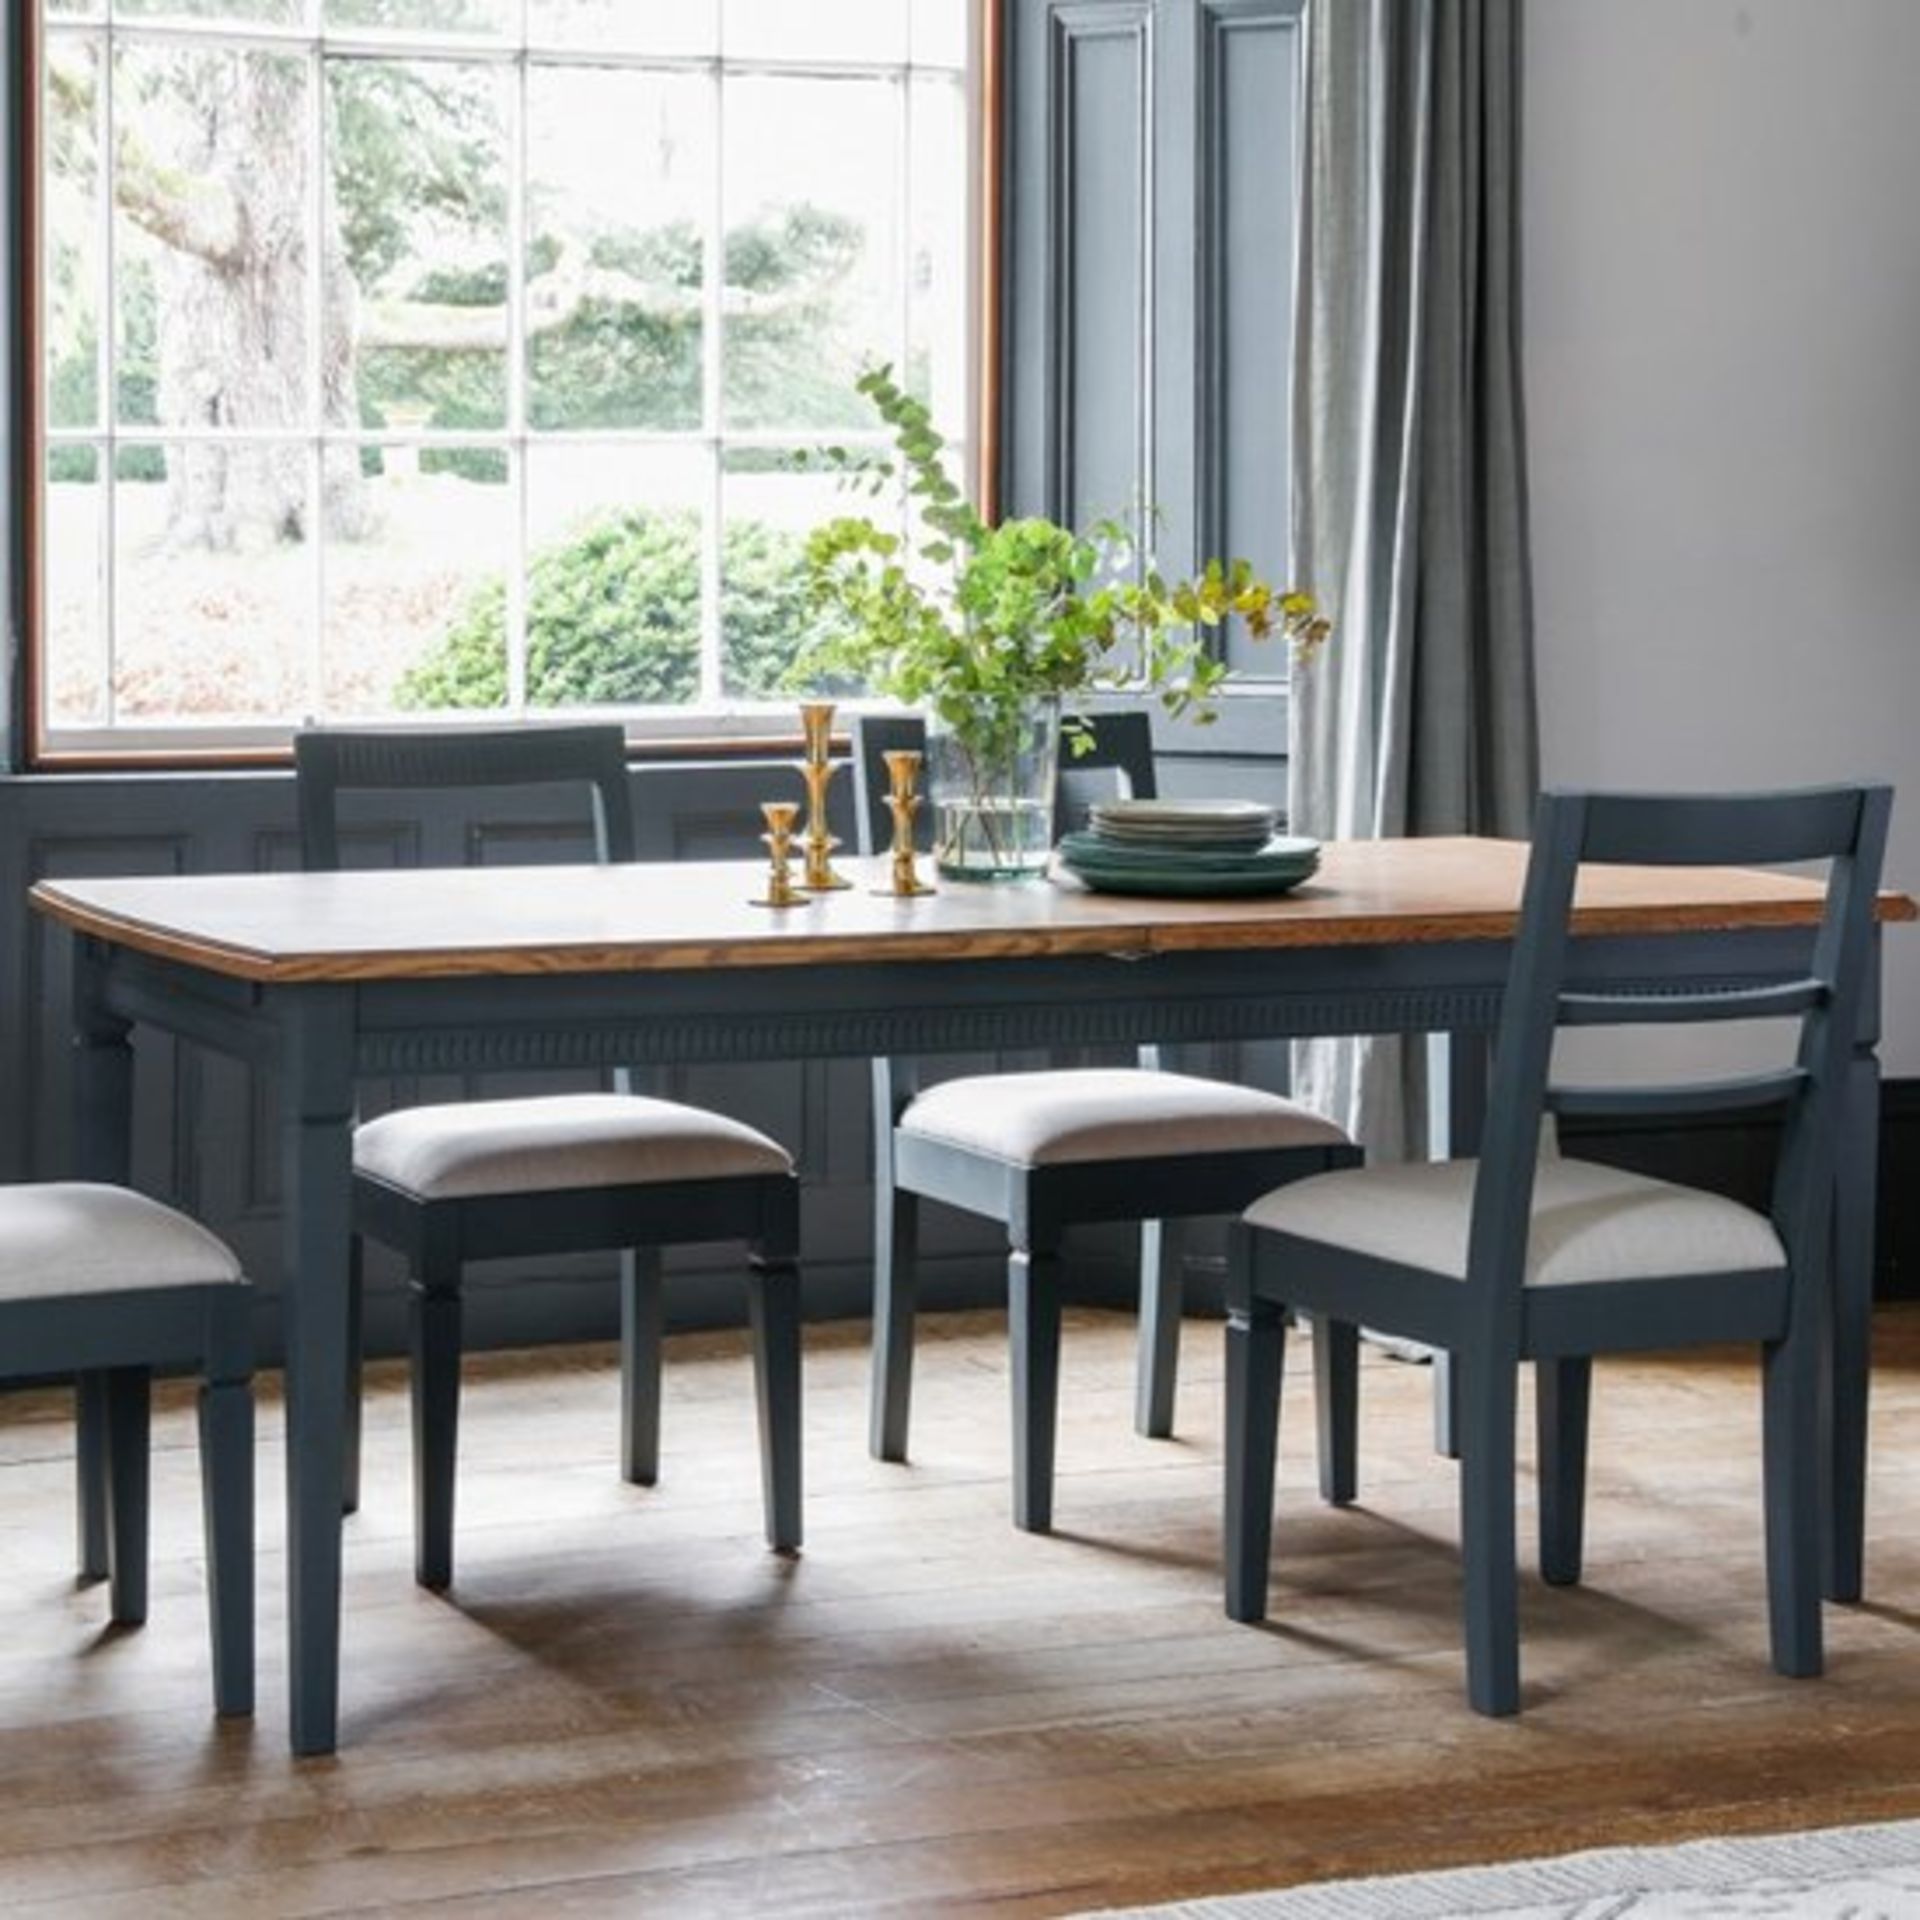 Bronte Extending Dining Table Storm The Bronte Extending Dining Table in Storm offers a classic look